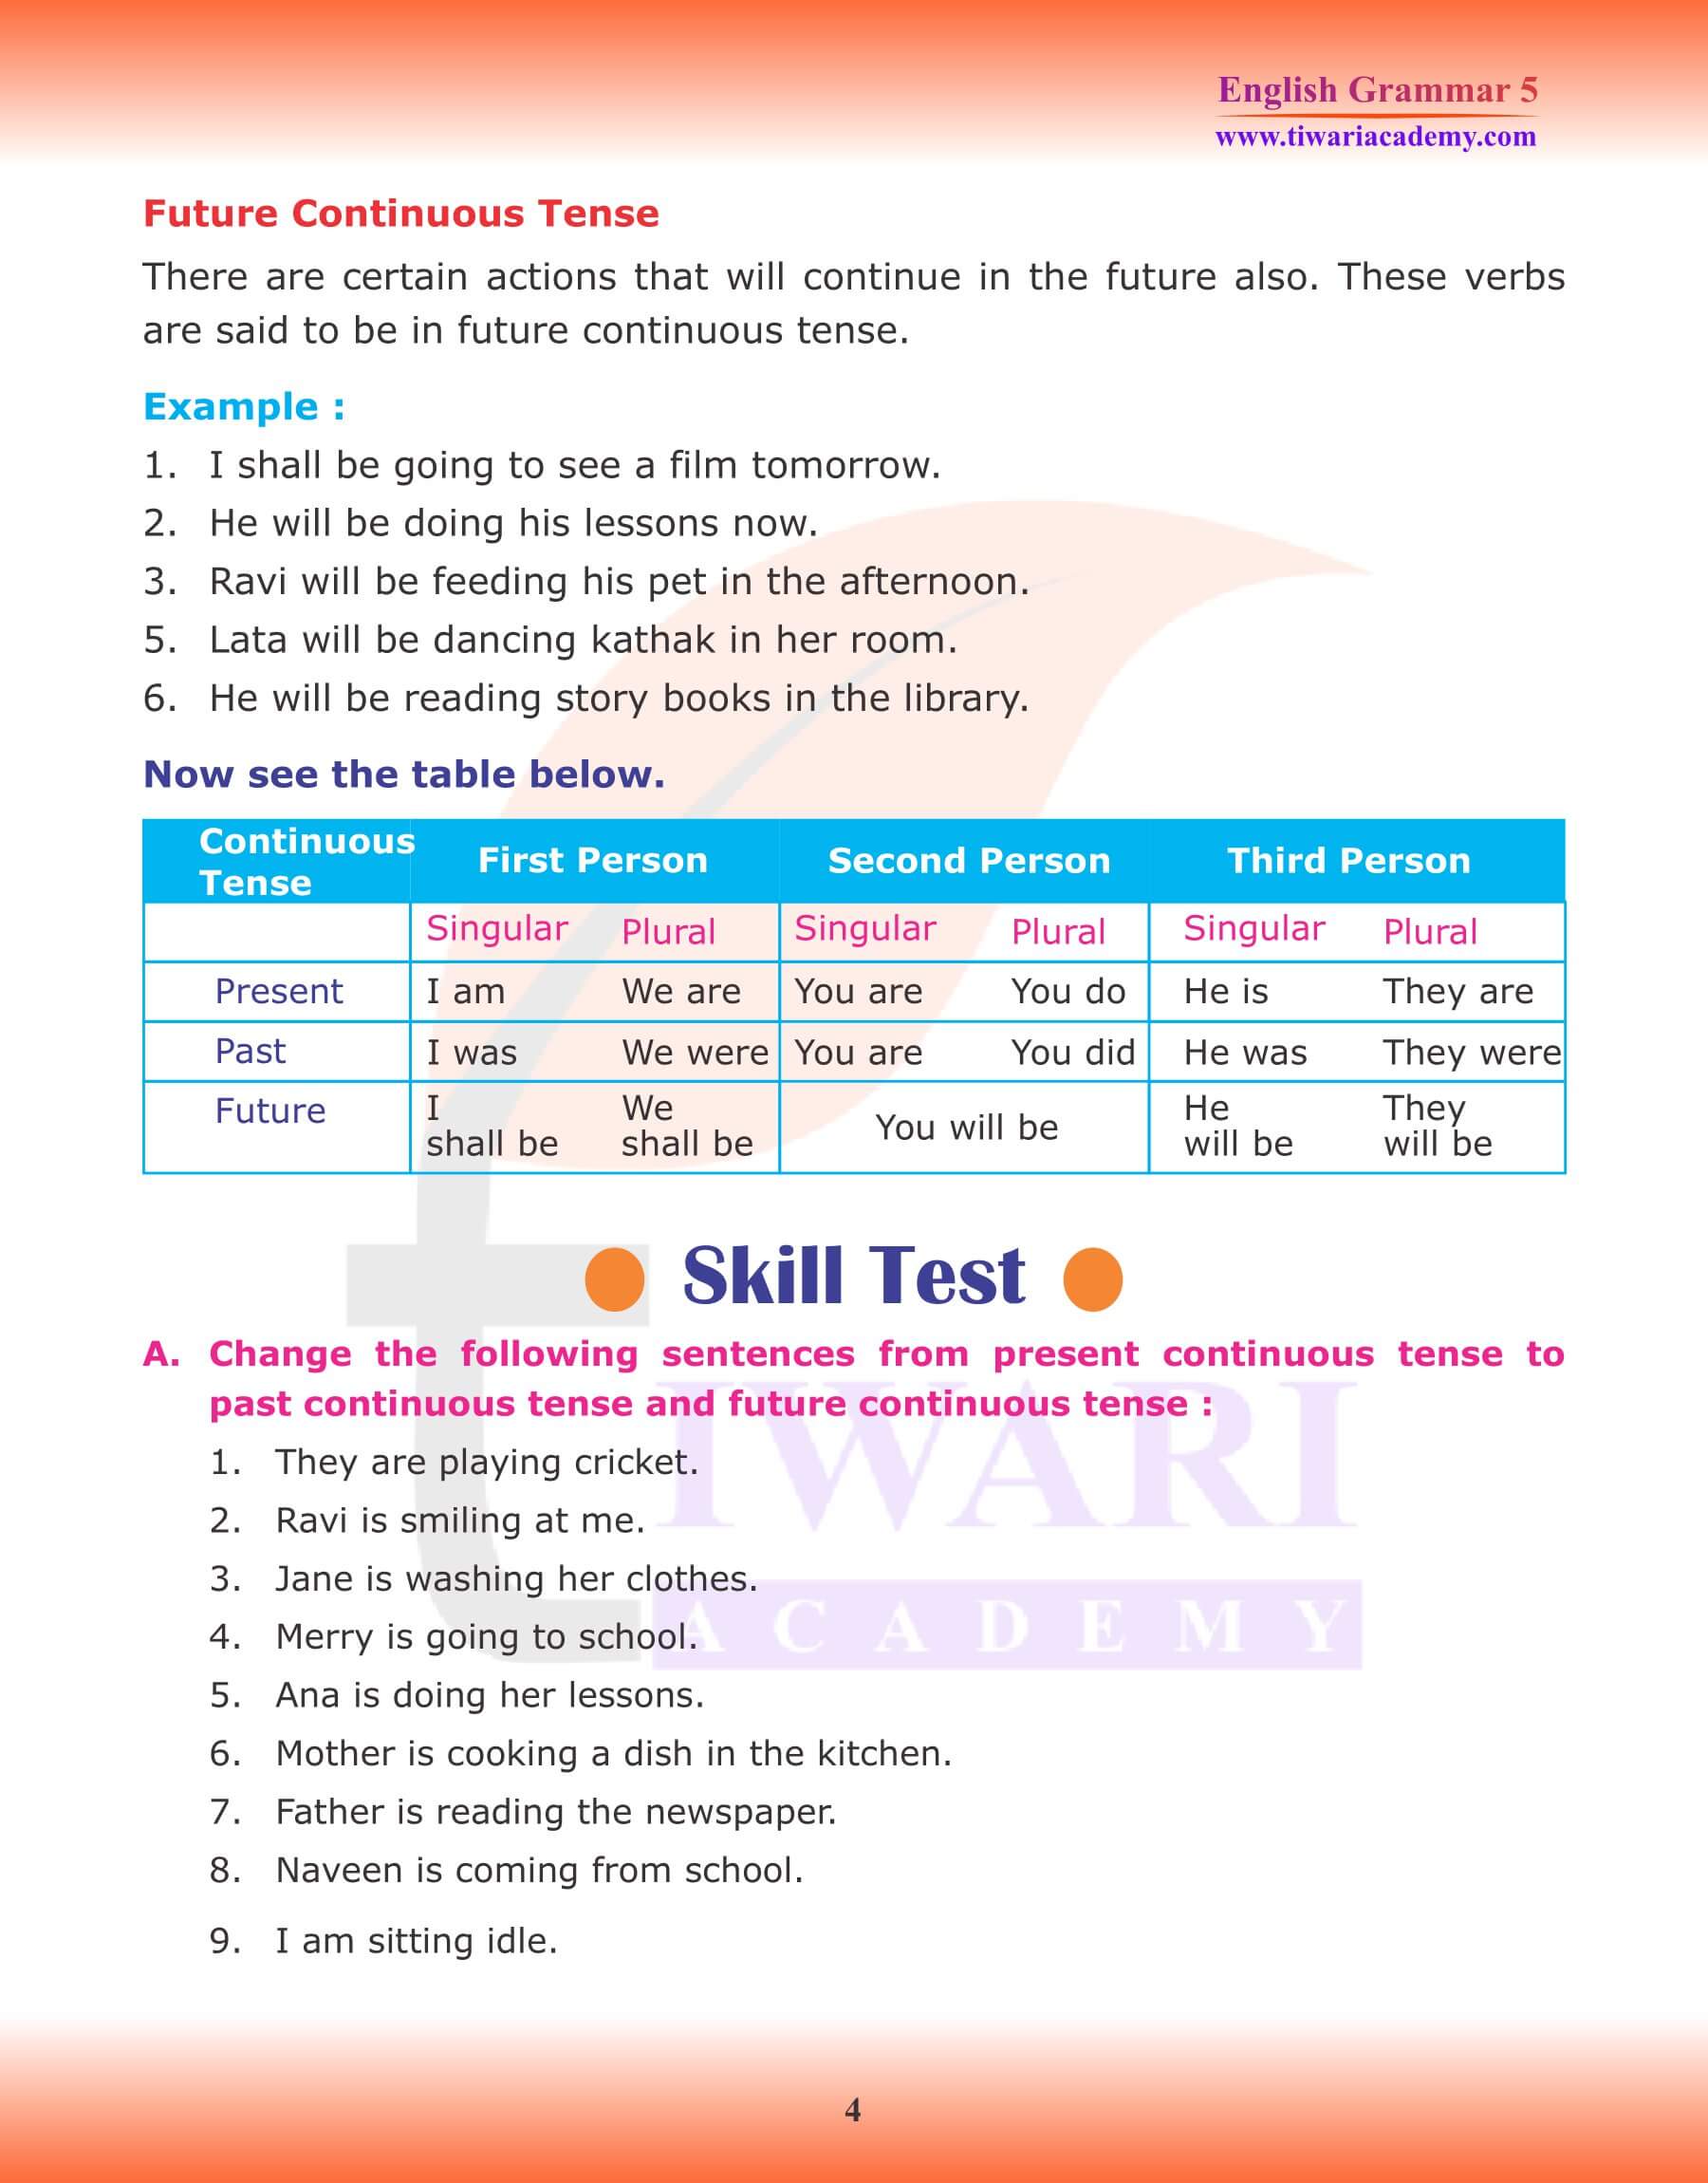 Class 5 English Grammar Chapter 6 Verb and Tense Exercises